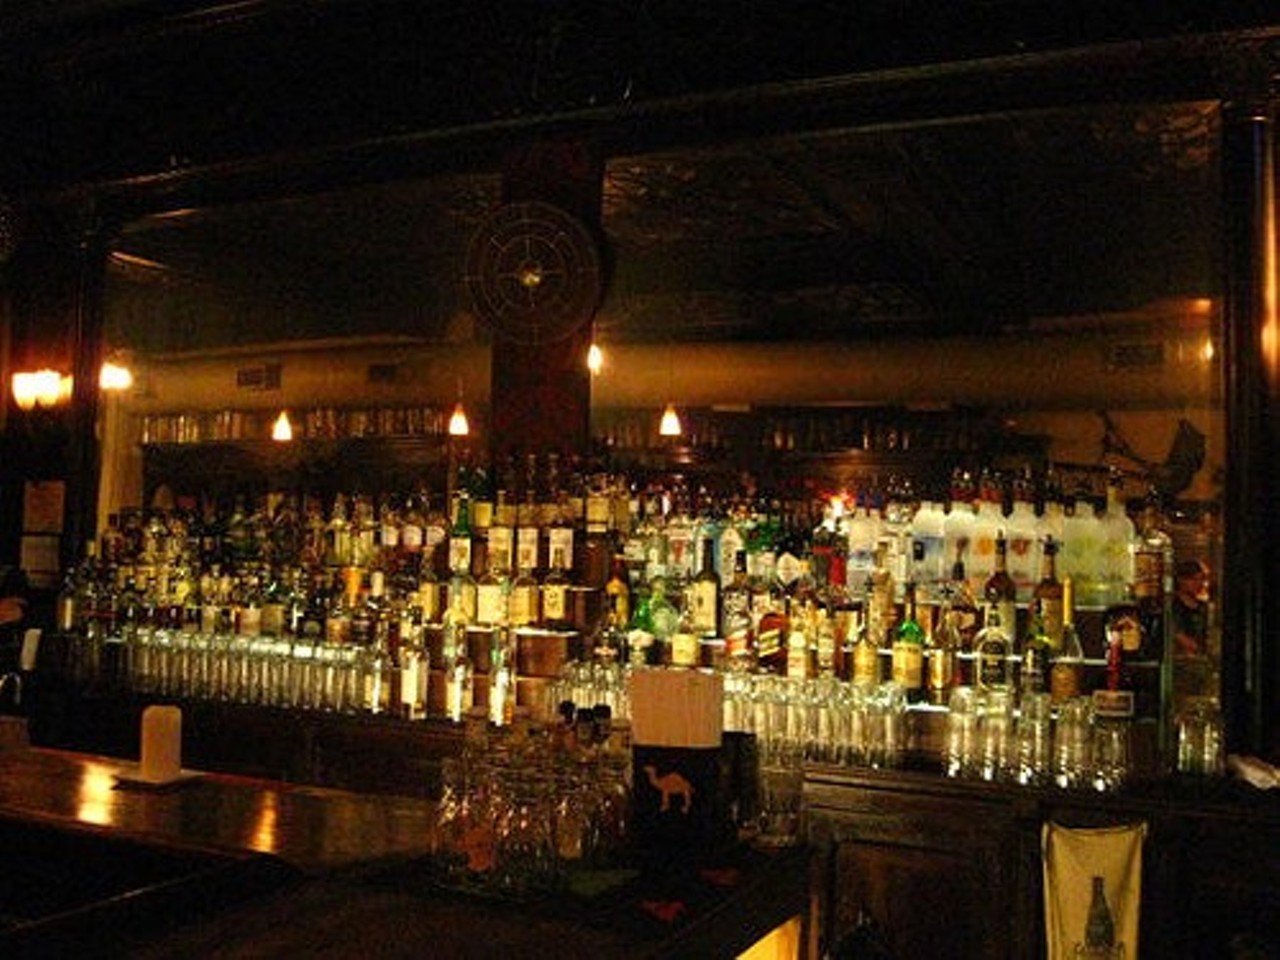 Best Bar to Be Left Alone
The Scottish Arms8 S. Sarah Street314-535-0551
Photo courtesy of RFT file photo